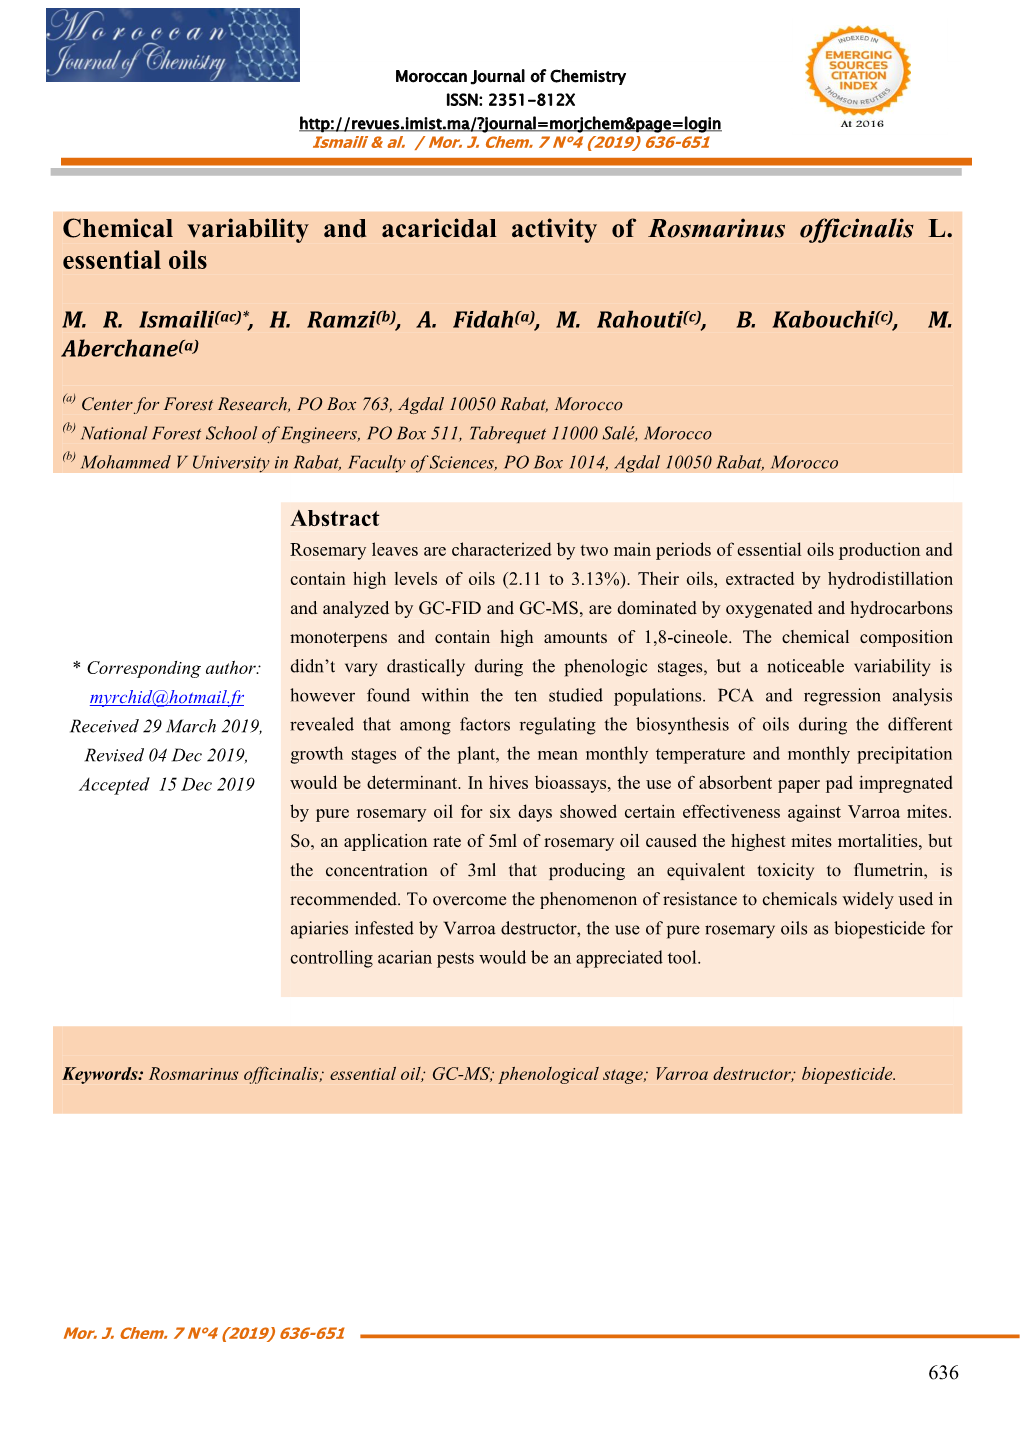 Chemical Variability and Acaricidal Activity of Rosmarinus Officinalis L. Essential Oils